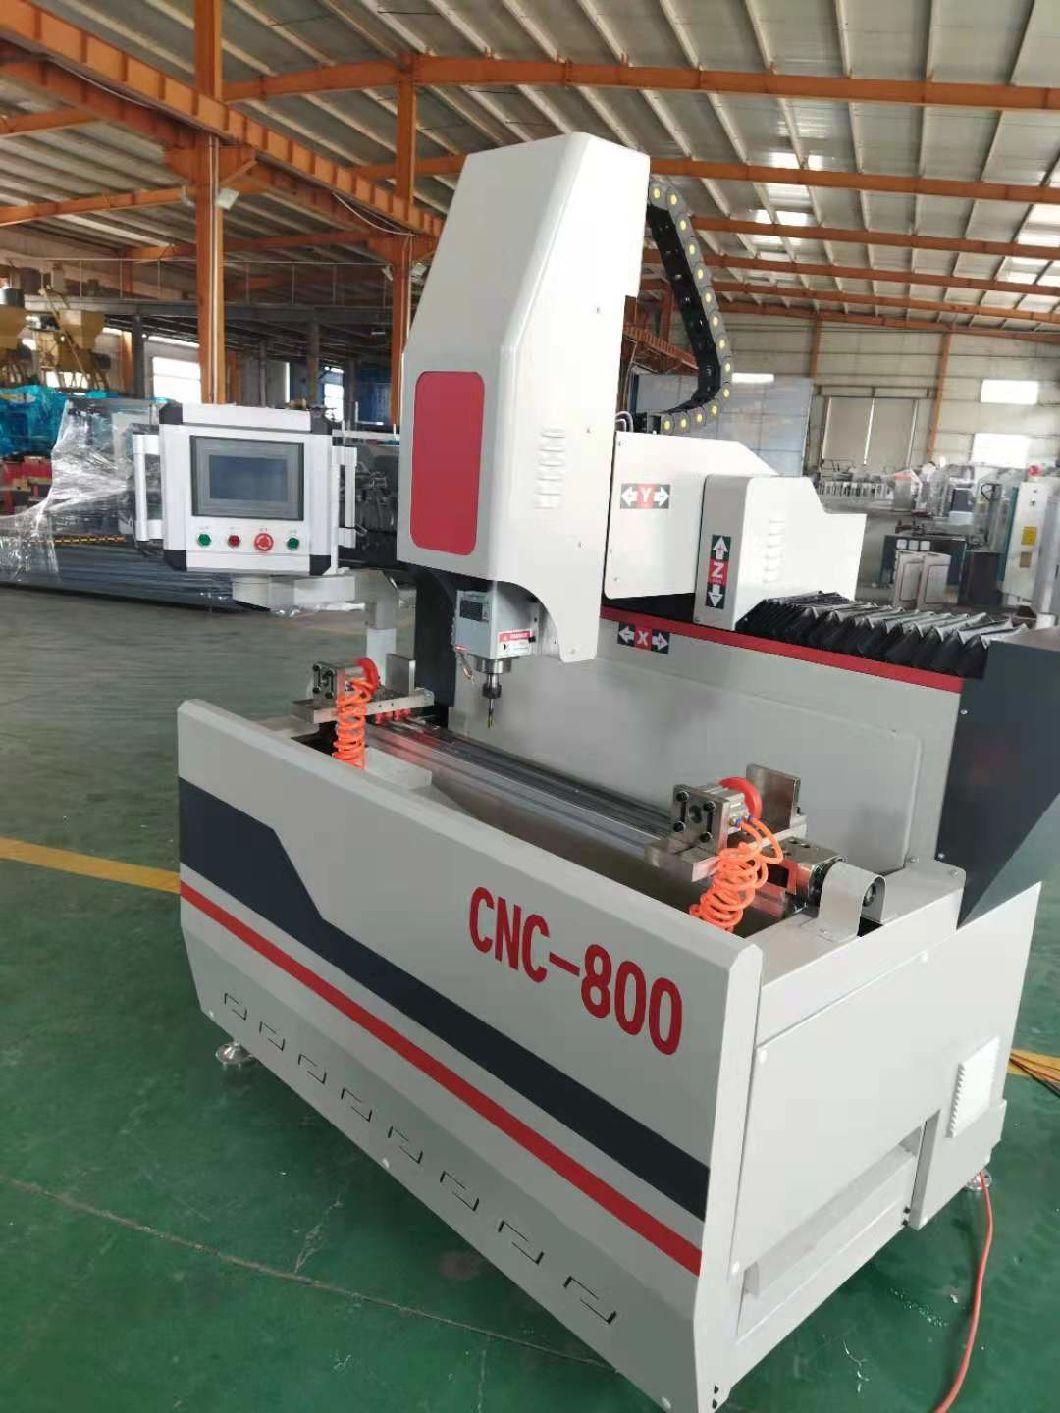 Lxf-CNC-800 CNC Drilling and Milling Machine for The Processing of Special-Shaped Holes of Aluminum Profile Milling for Doors and Windows Making